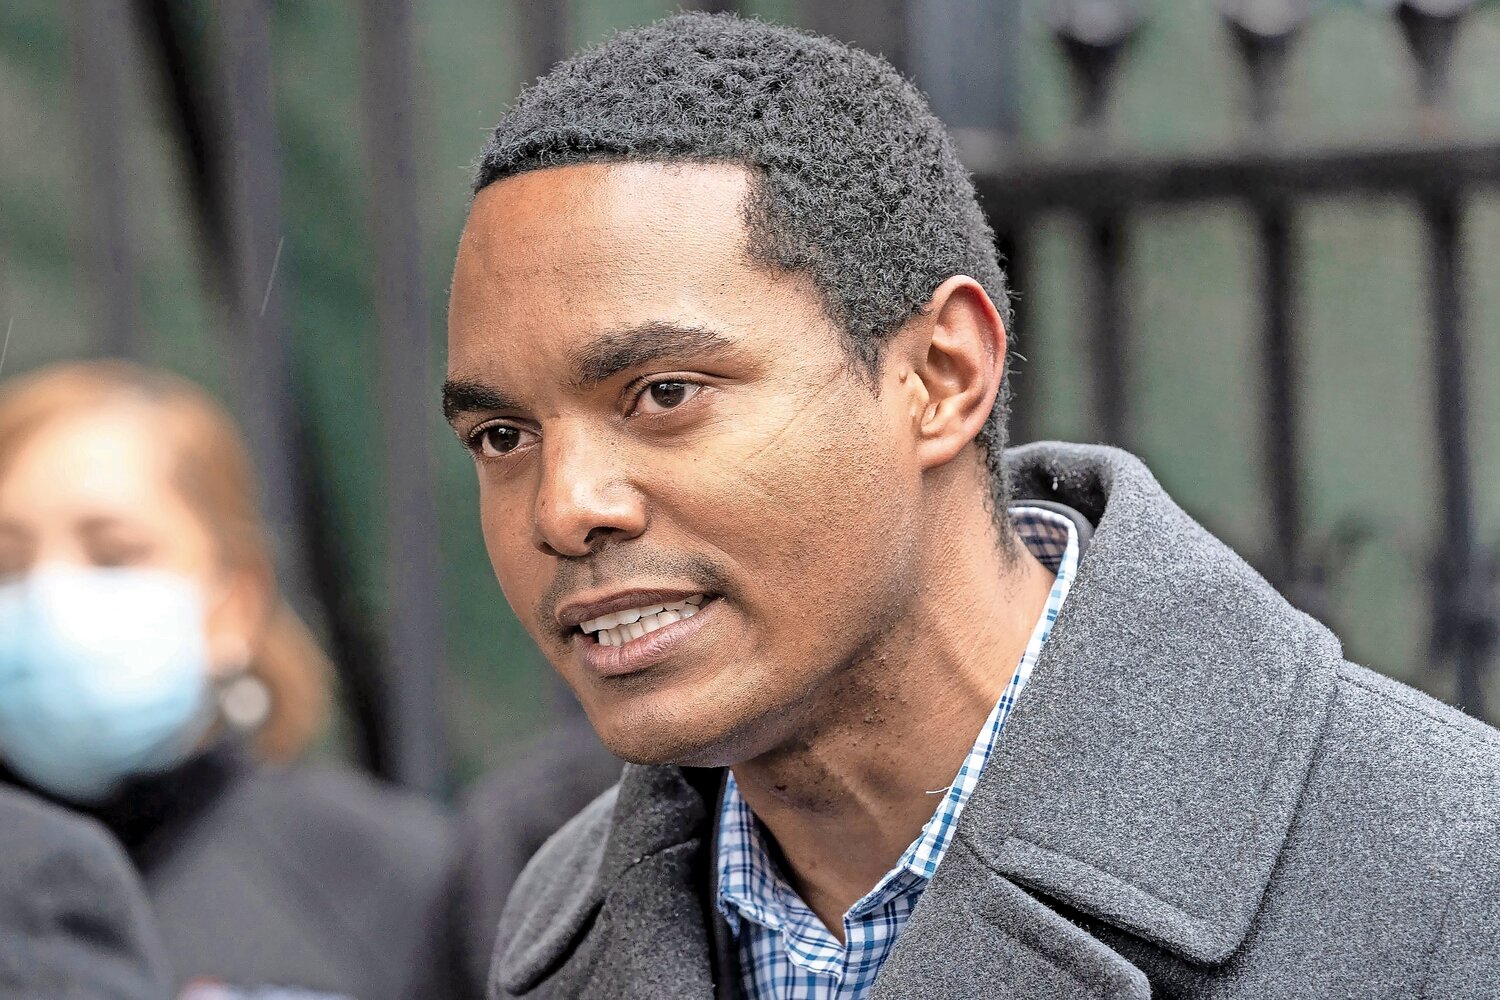 Rep. Ritchie Torres in New York City on Jan. 9, 2022.